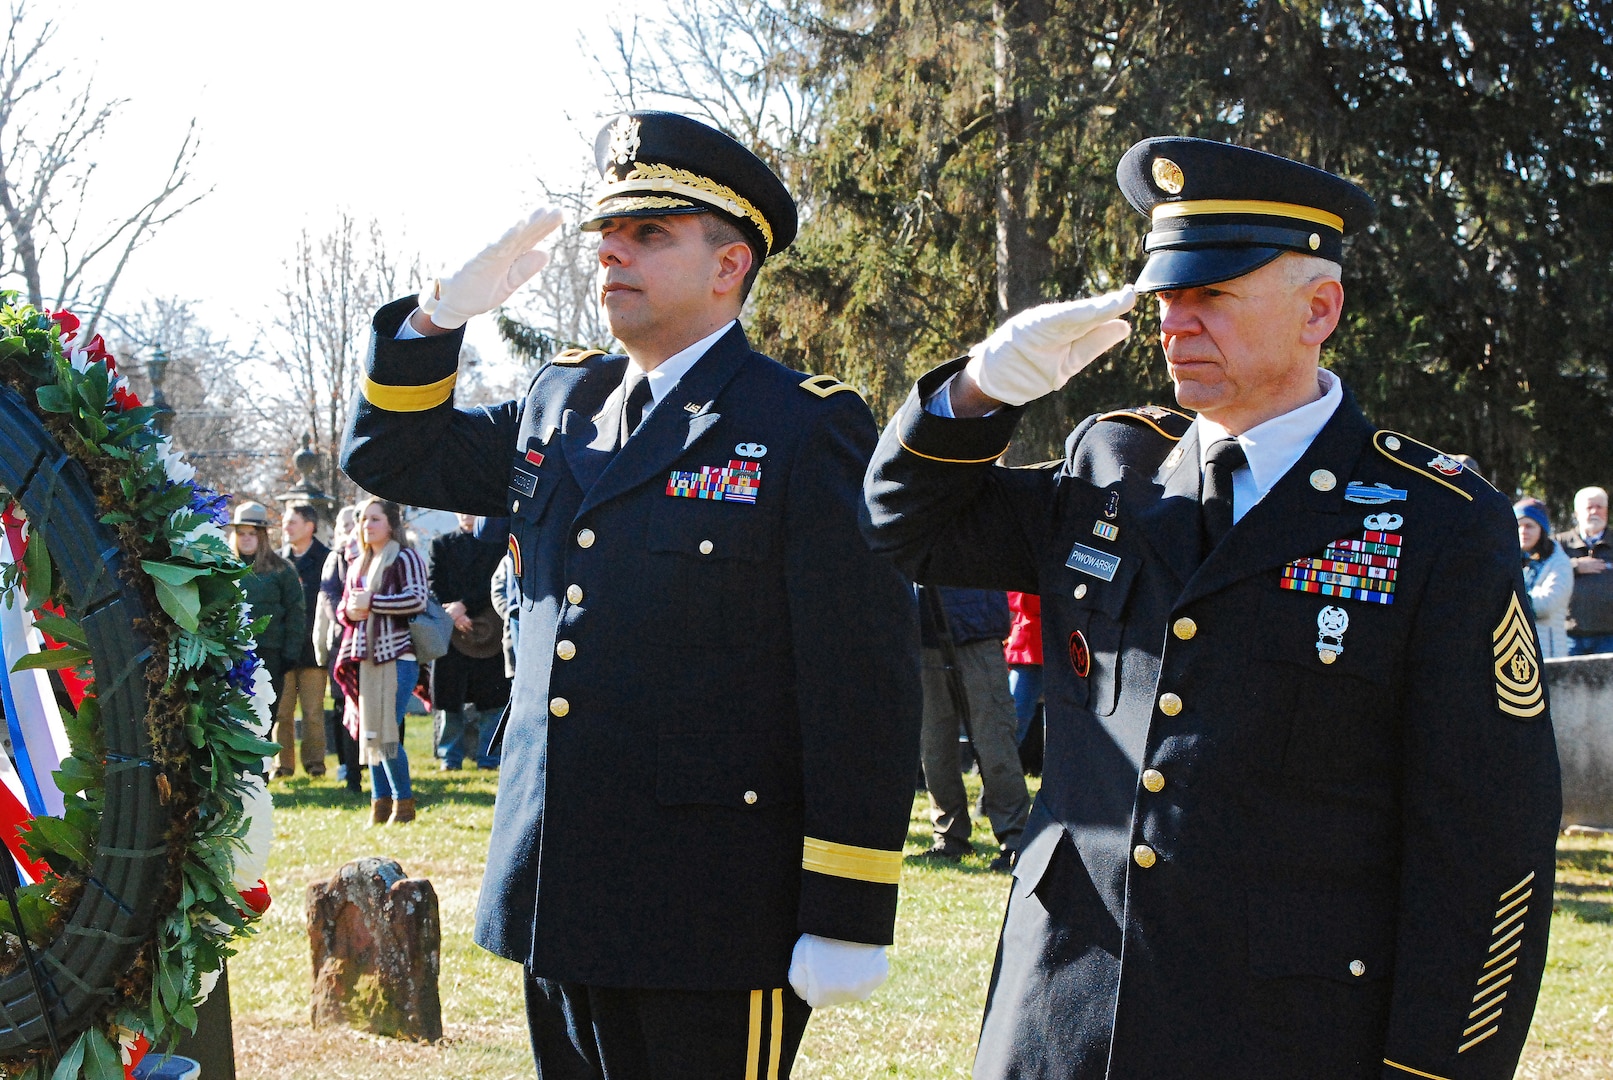 New York Army National Guard Command Sgt. Major David Piwowarski and Brig. Gen. John Adonie, render honors to President Martin Van Buren, the 8th president of the United States, during a Dec. 5, 2018 ceremony at his gravesite at Kinderhook Reformed Church Cemetery in Kinderhook, N.Y.